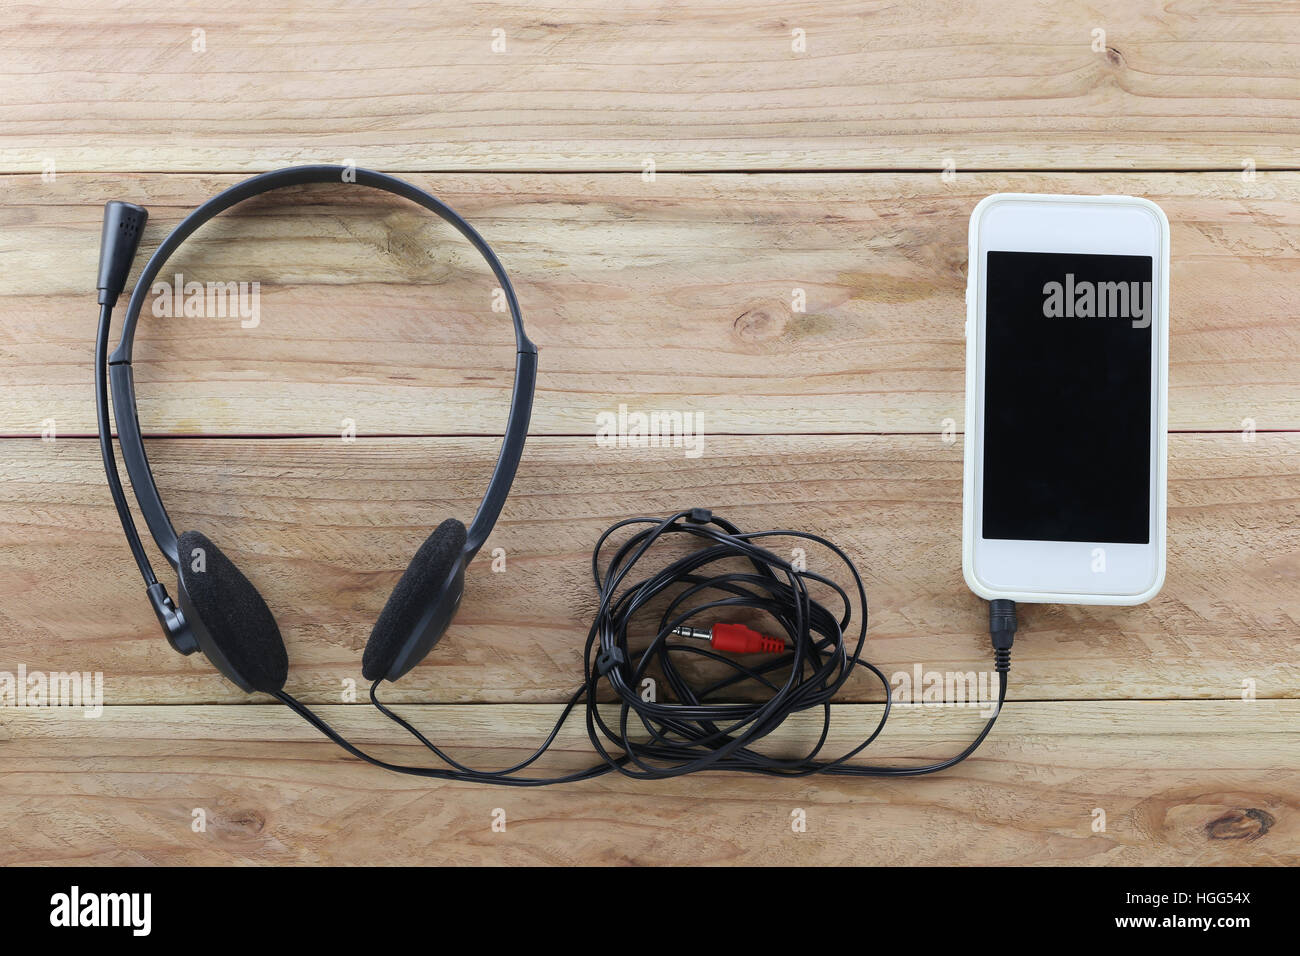 White smartphone on brown wood background and a headset is Device connected,concept of music and technology. Stock Photo